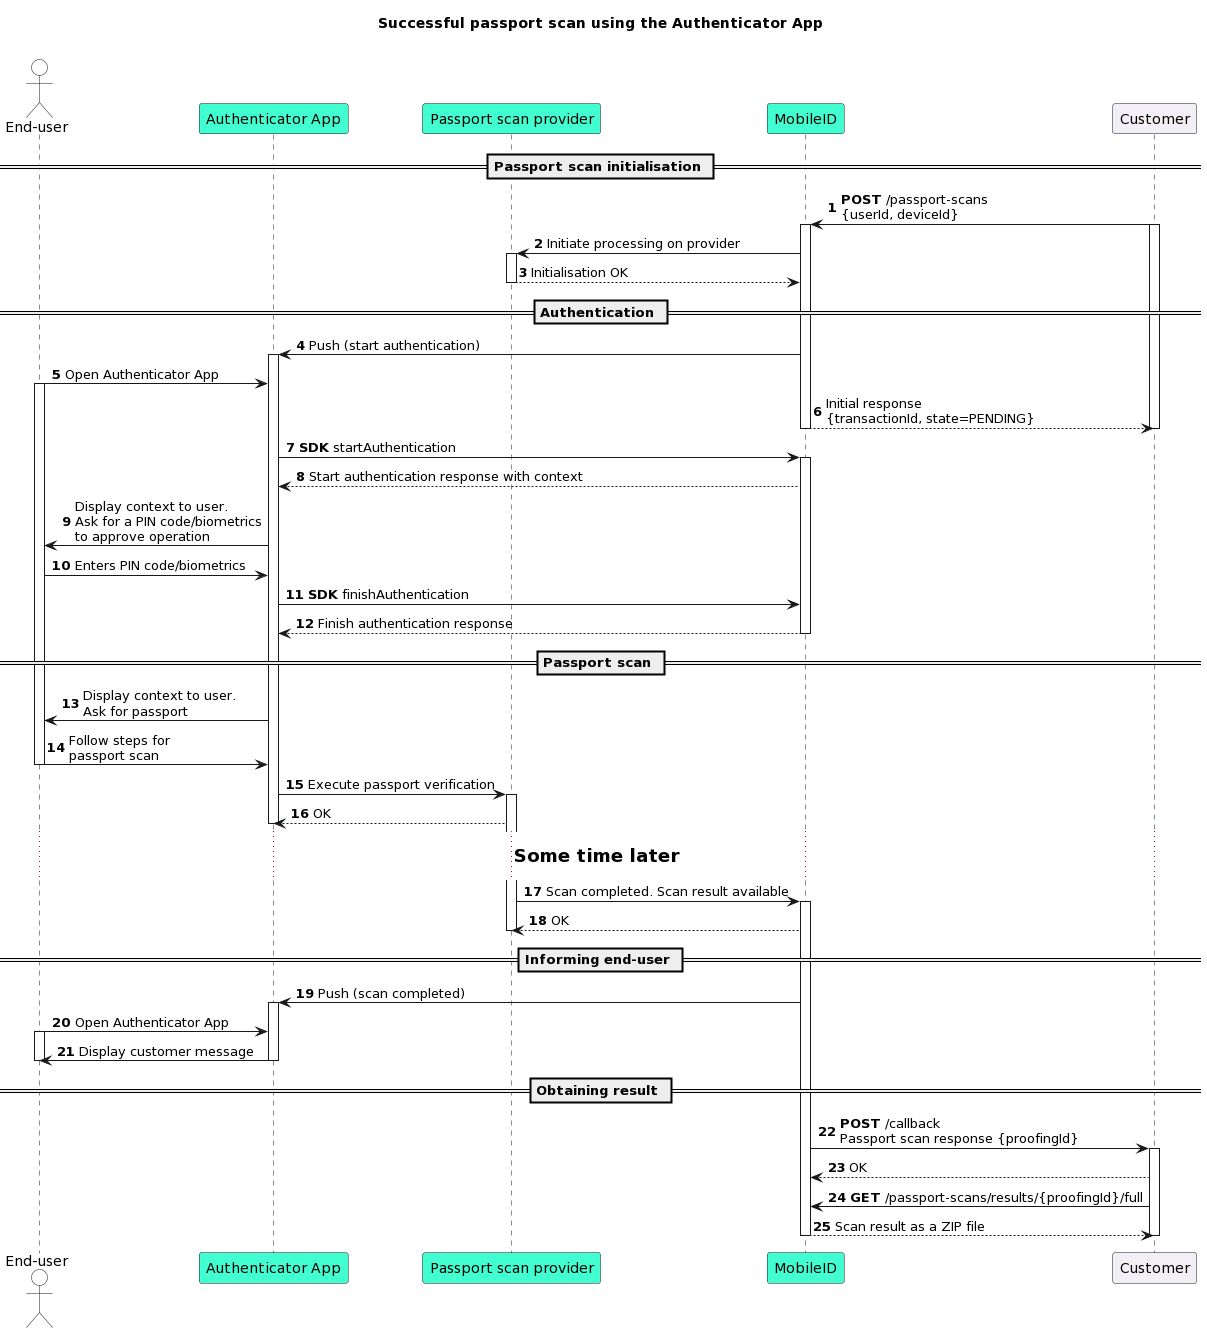 Sequence diagram illustrating a successful passport scan being undertaken by an end-user with the Authenticator App click-to-zoom